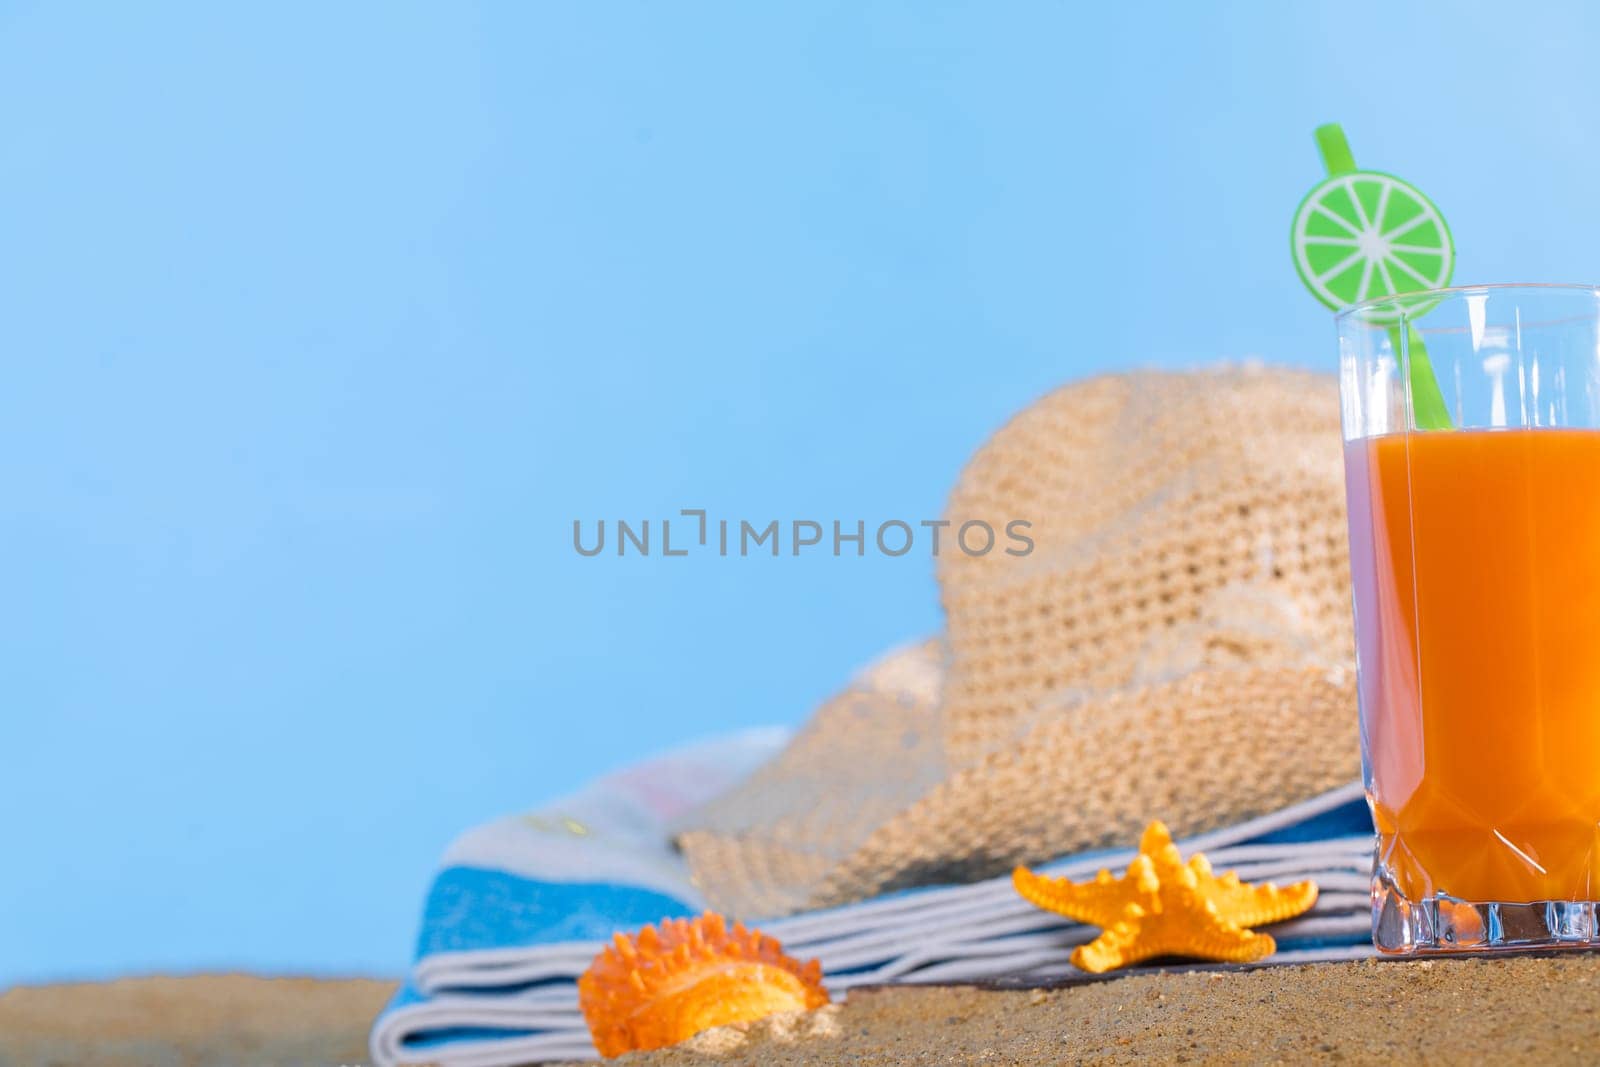 Fresh orange fruit juice stands in a glass with a straw. A beach towel lies on the sandy beach. Blue sky.